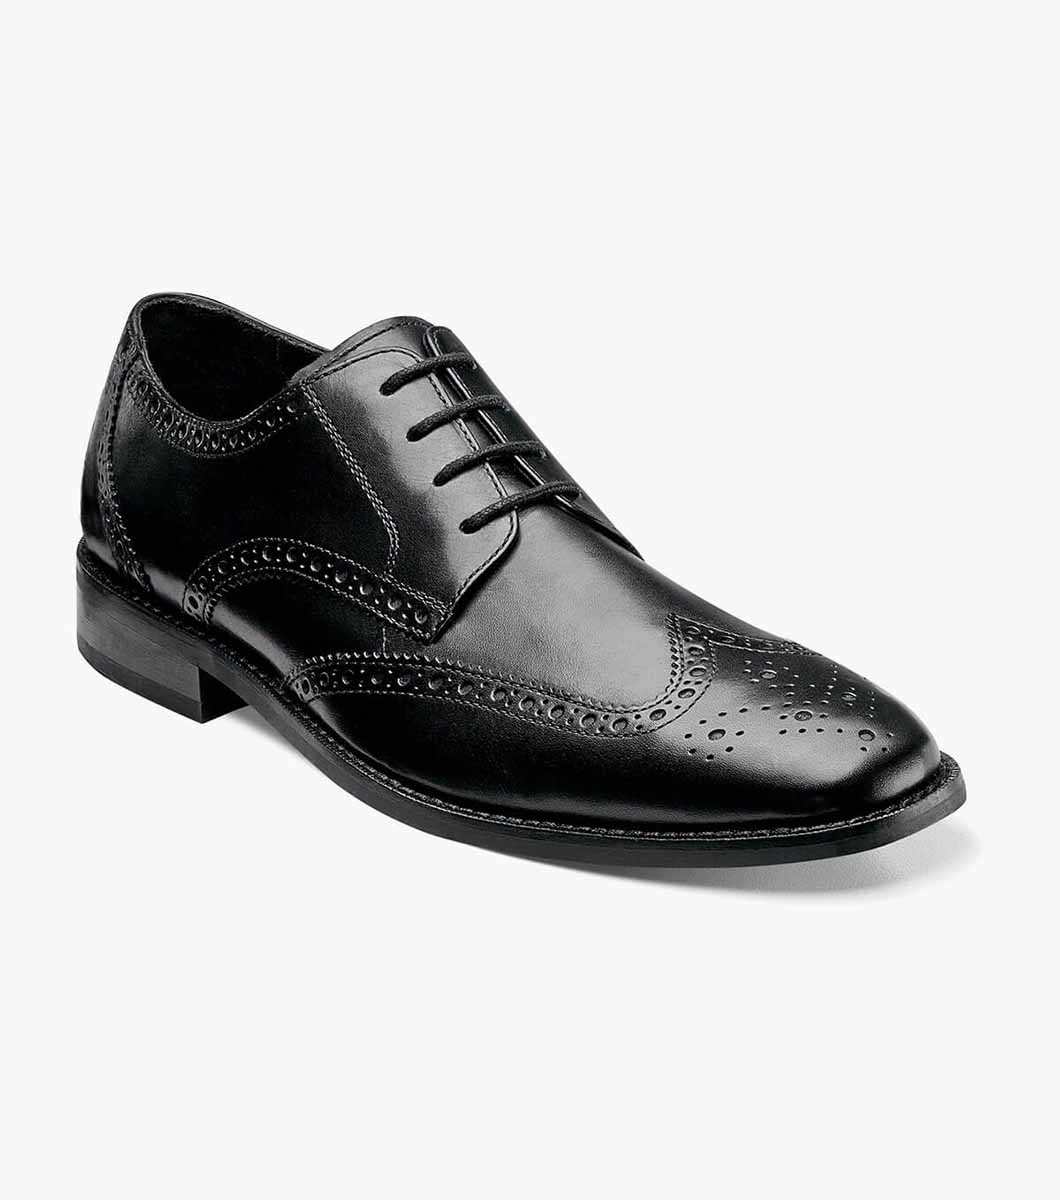 extra wide wingtip shoes